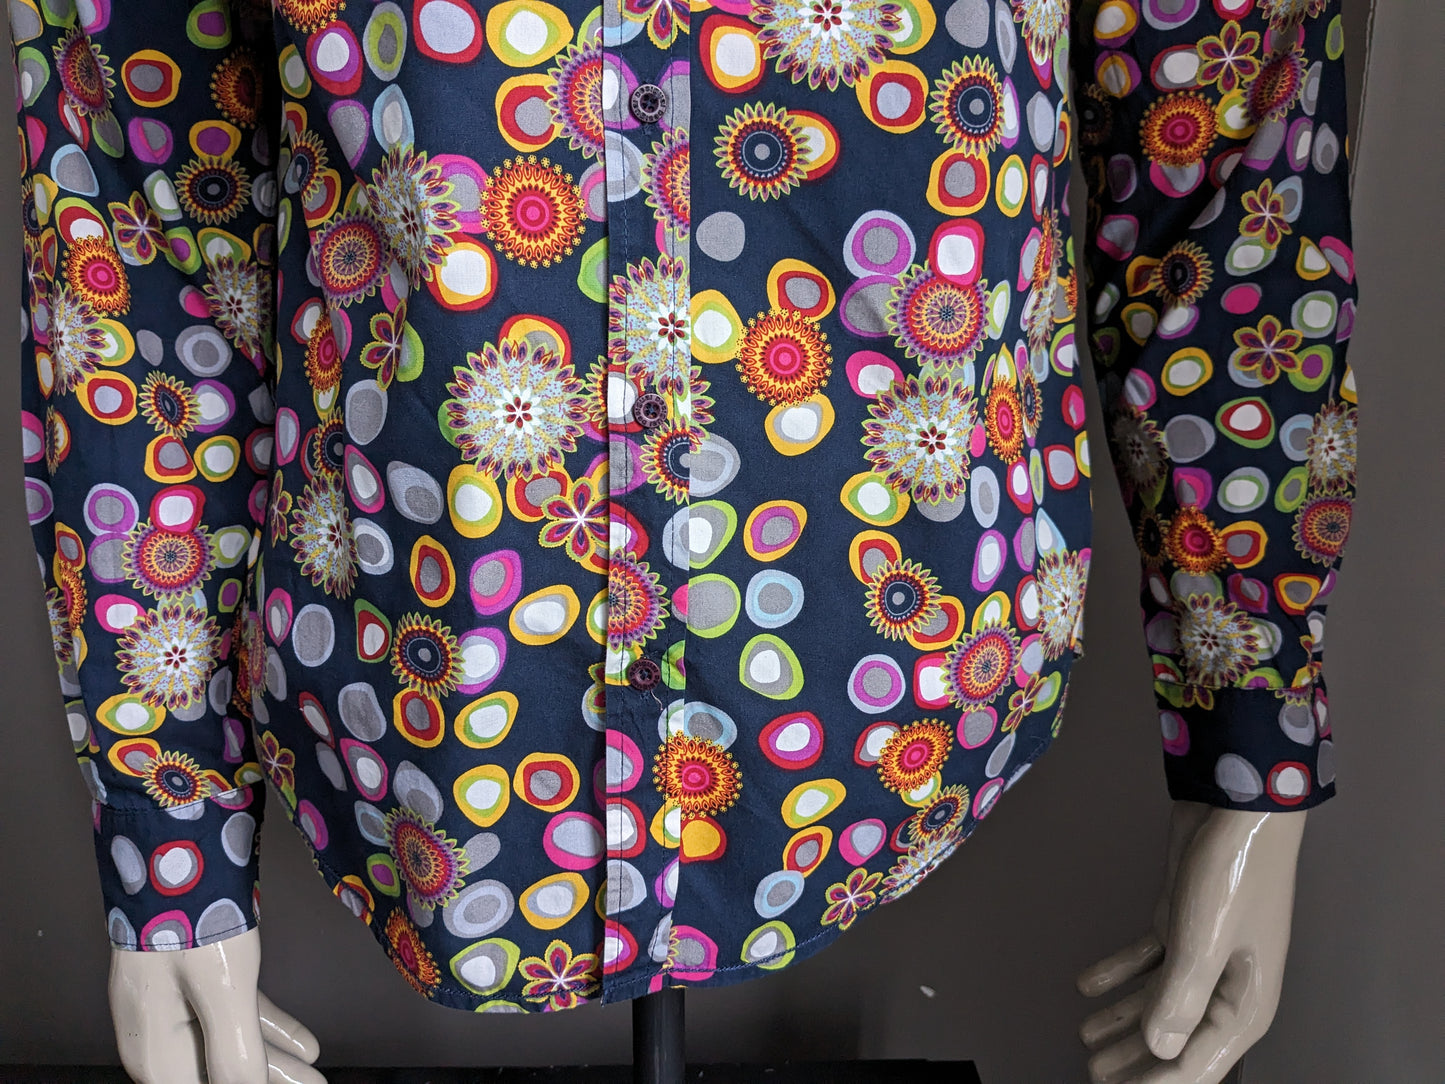 Desigual shirt. Colored balls and flowers print. Size M.